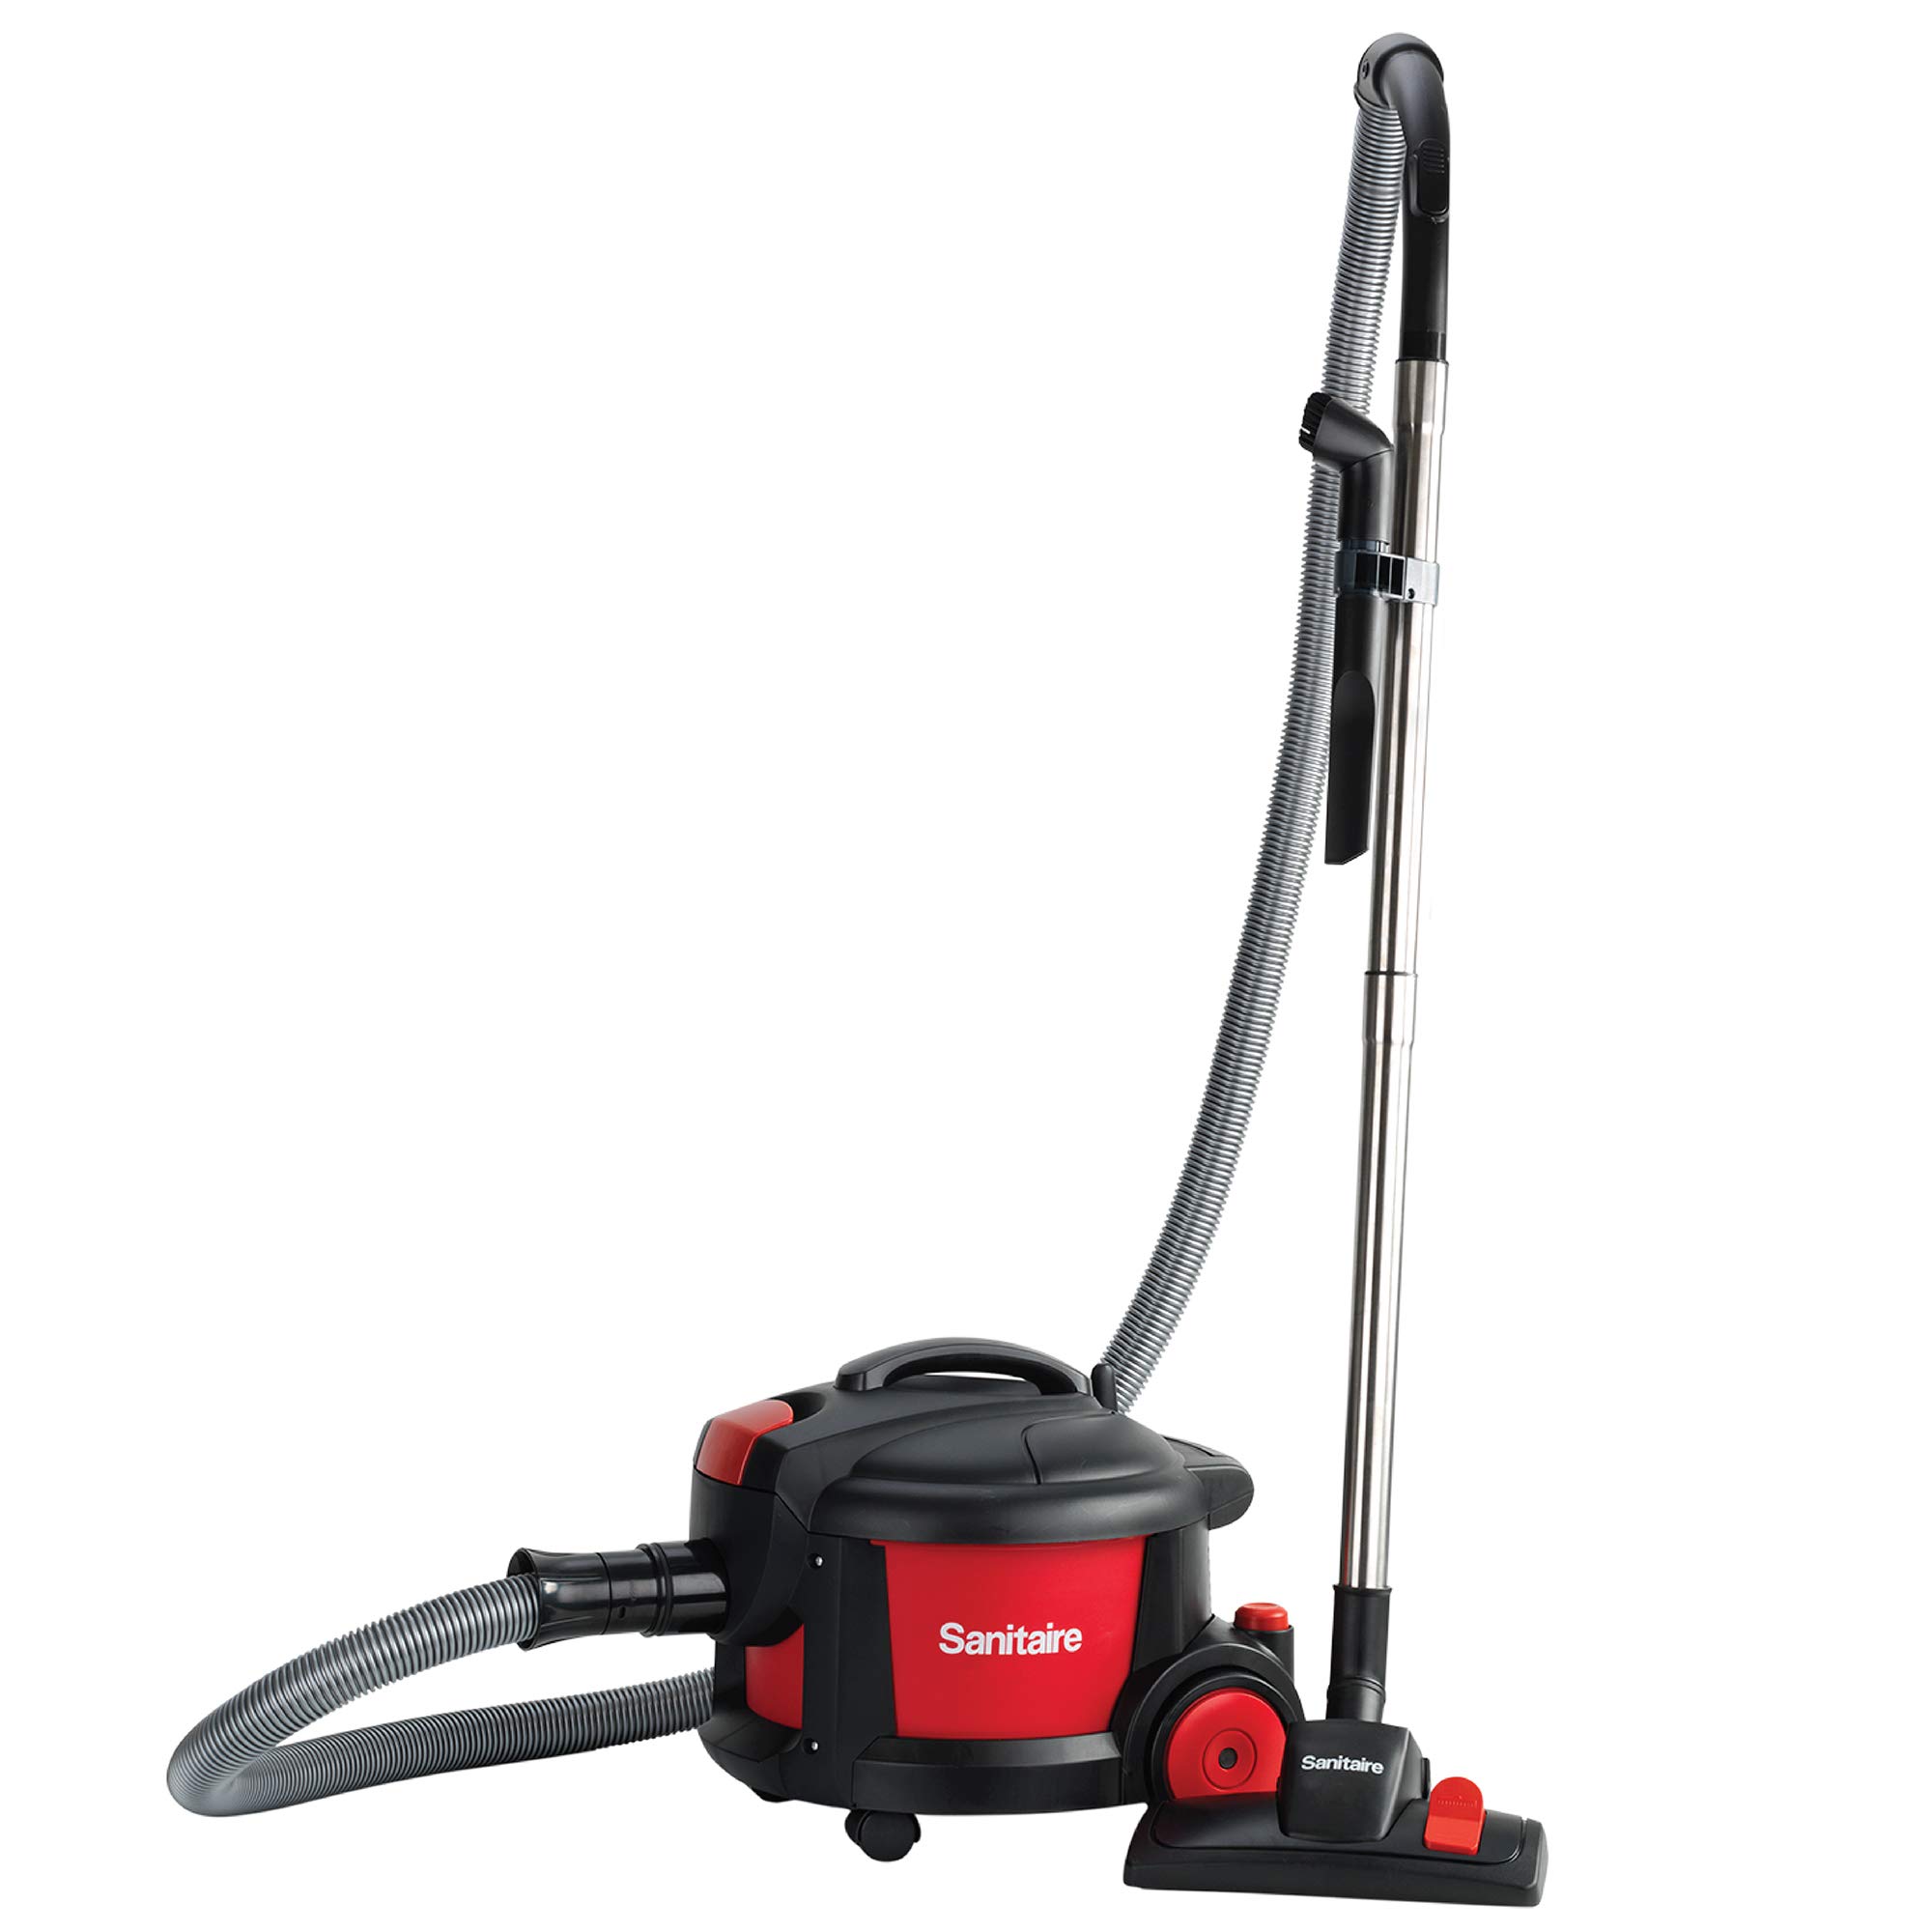 Sanitaire SC3700A Quiet Clean Canister Vacuum, Red/Blac...